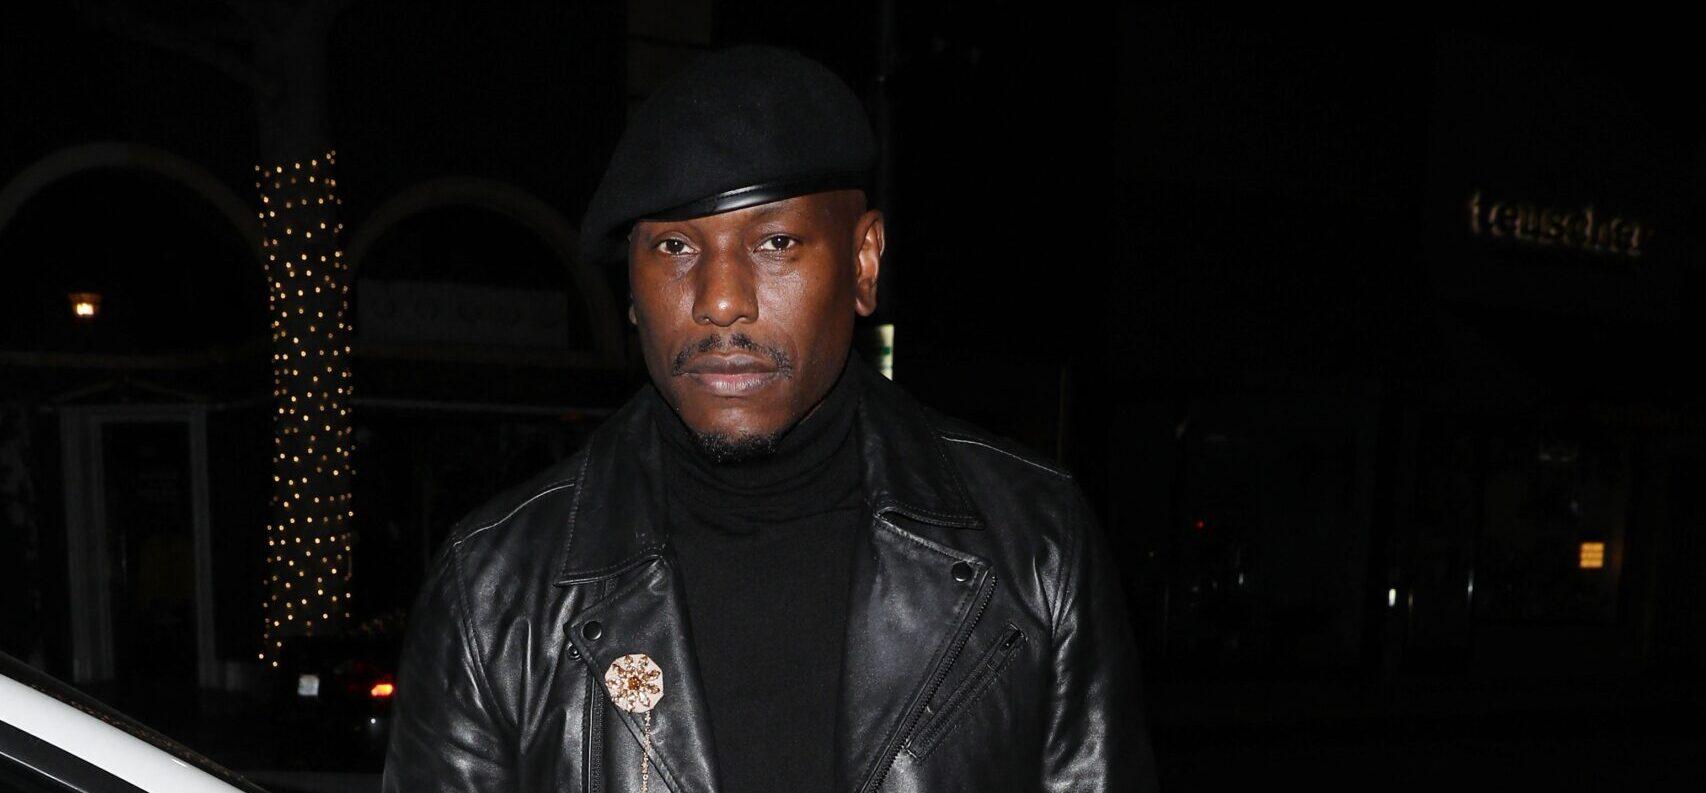 Tyrese Gibson Responds To Home Depot: ‘Trump Supporter Attempts To Slander Me!’